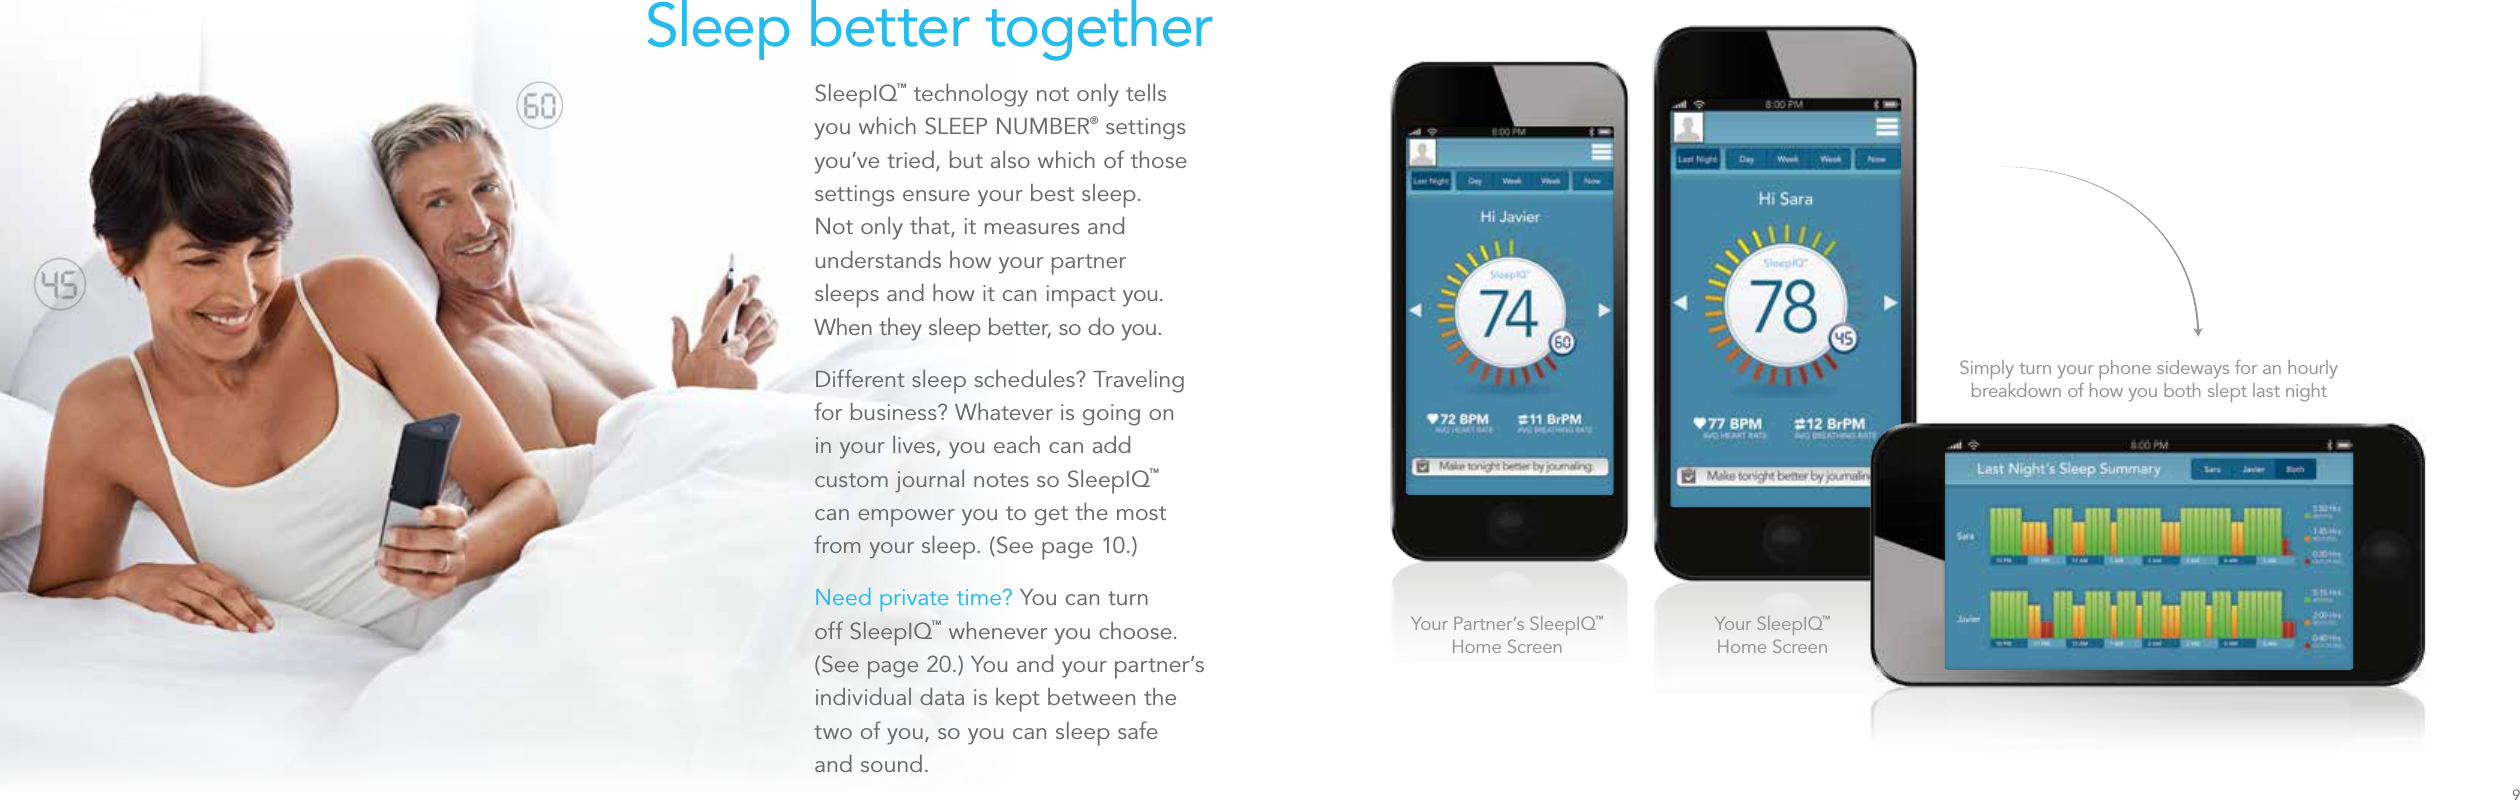 SleepIQ™ technology not only tells you which SLEEP NUMBER® settings you’ve tried, but also which of those settings ensure your best sleep. Not only that, it measures and understands how your partner  sleeps and how it can impact you. When they sleep better, so do you.Different sleep schedules? Traveling for business? Whatever is going on  in your lives, you each can add custom journal notes so SleepIQ™  can empower you to get the most from your sleep. (See page 10.)Need private time? You can turn  off SleepIQ™ whenever you choose. (See page 20.) You and your partner’s individual data is kept between the two of you, so you can sleep safe  and sound.Sleep better togetherSimply turn your phone sideways for an hourly breakdown of how you both slept last nightYour Partner’s SleepIQ™ Home ScreenYour SleepIQ™ Home Screen9